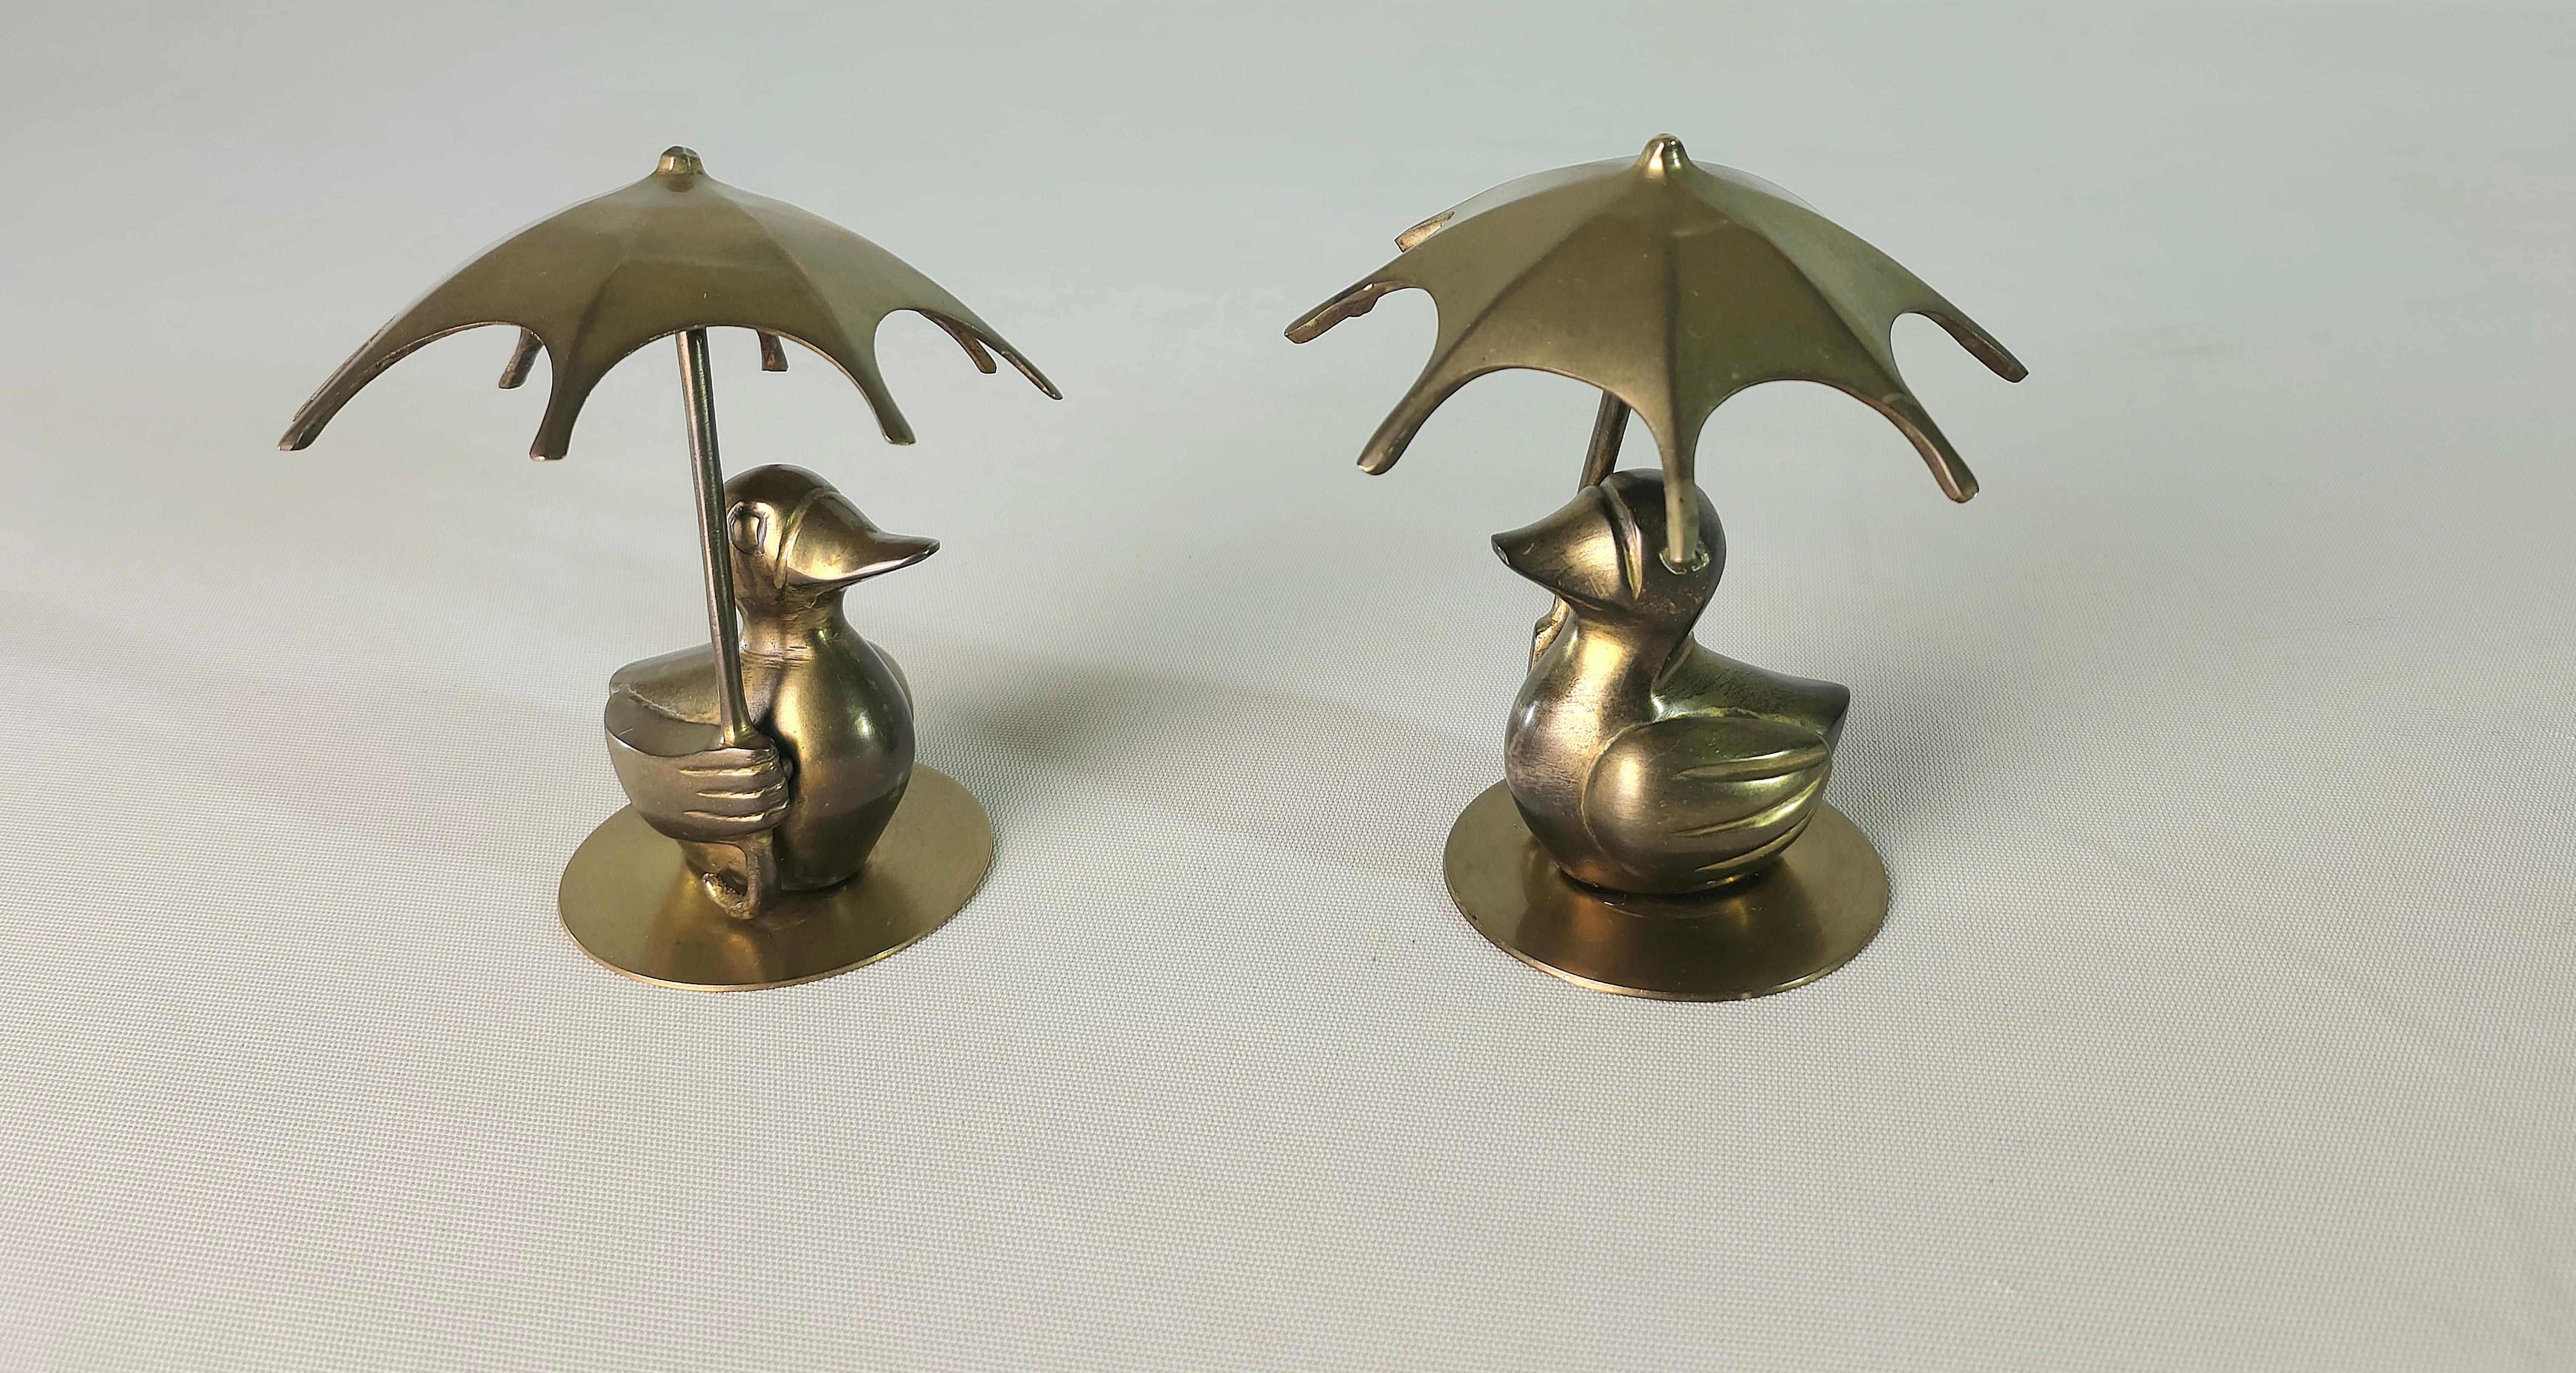 Two Brass Decorative Objects Midcentury Modern Italia 1960/70s For Sale 3